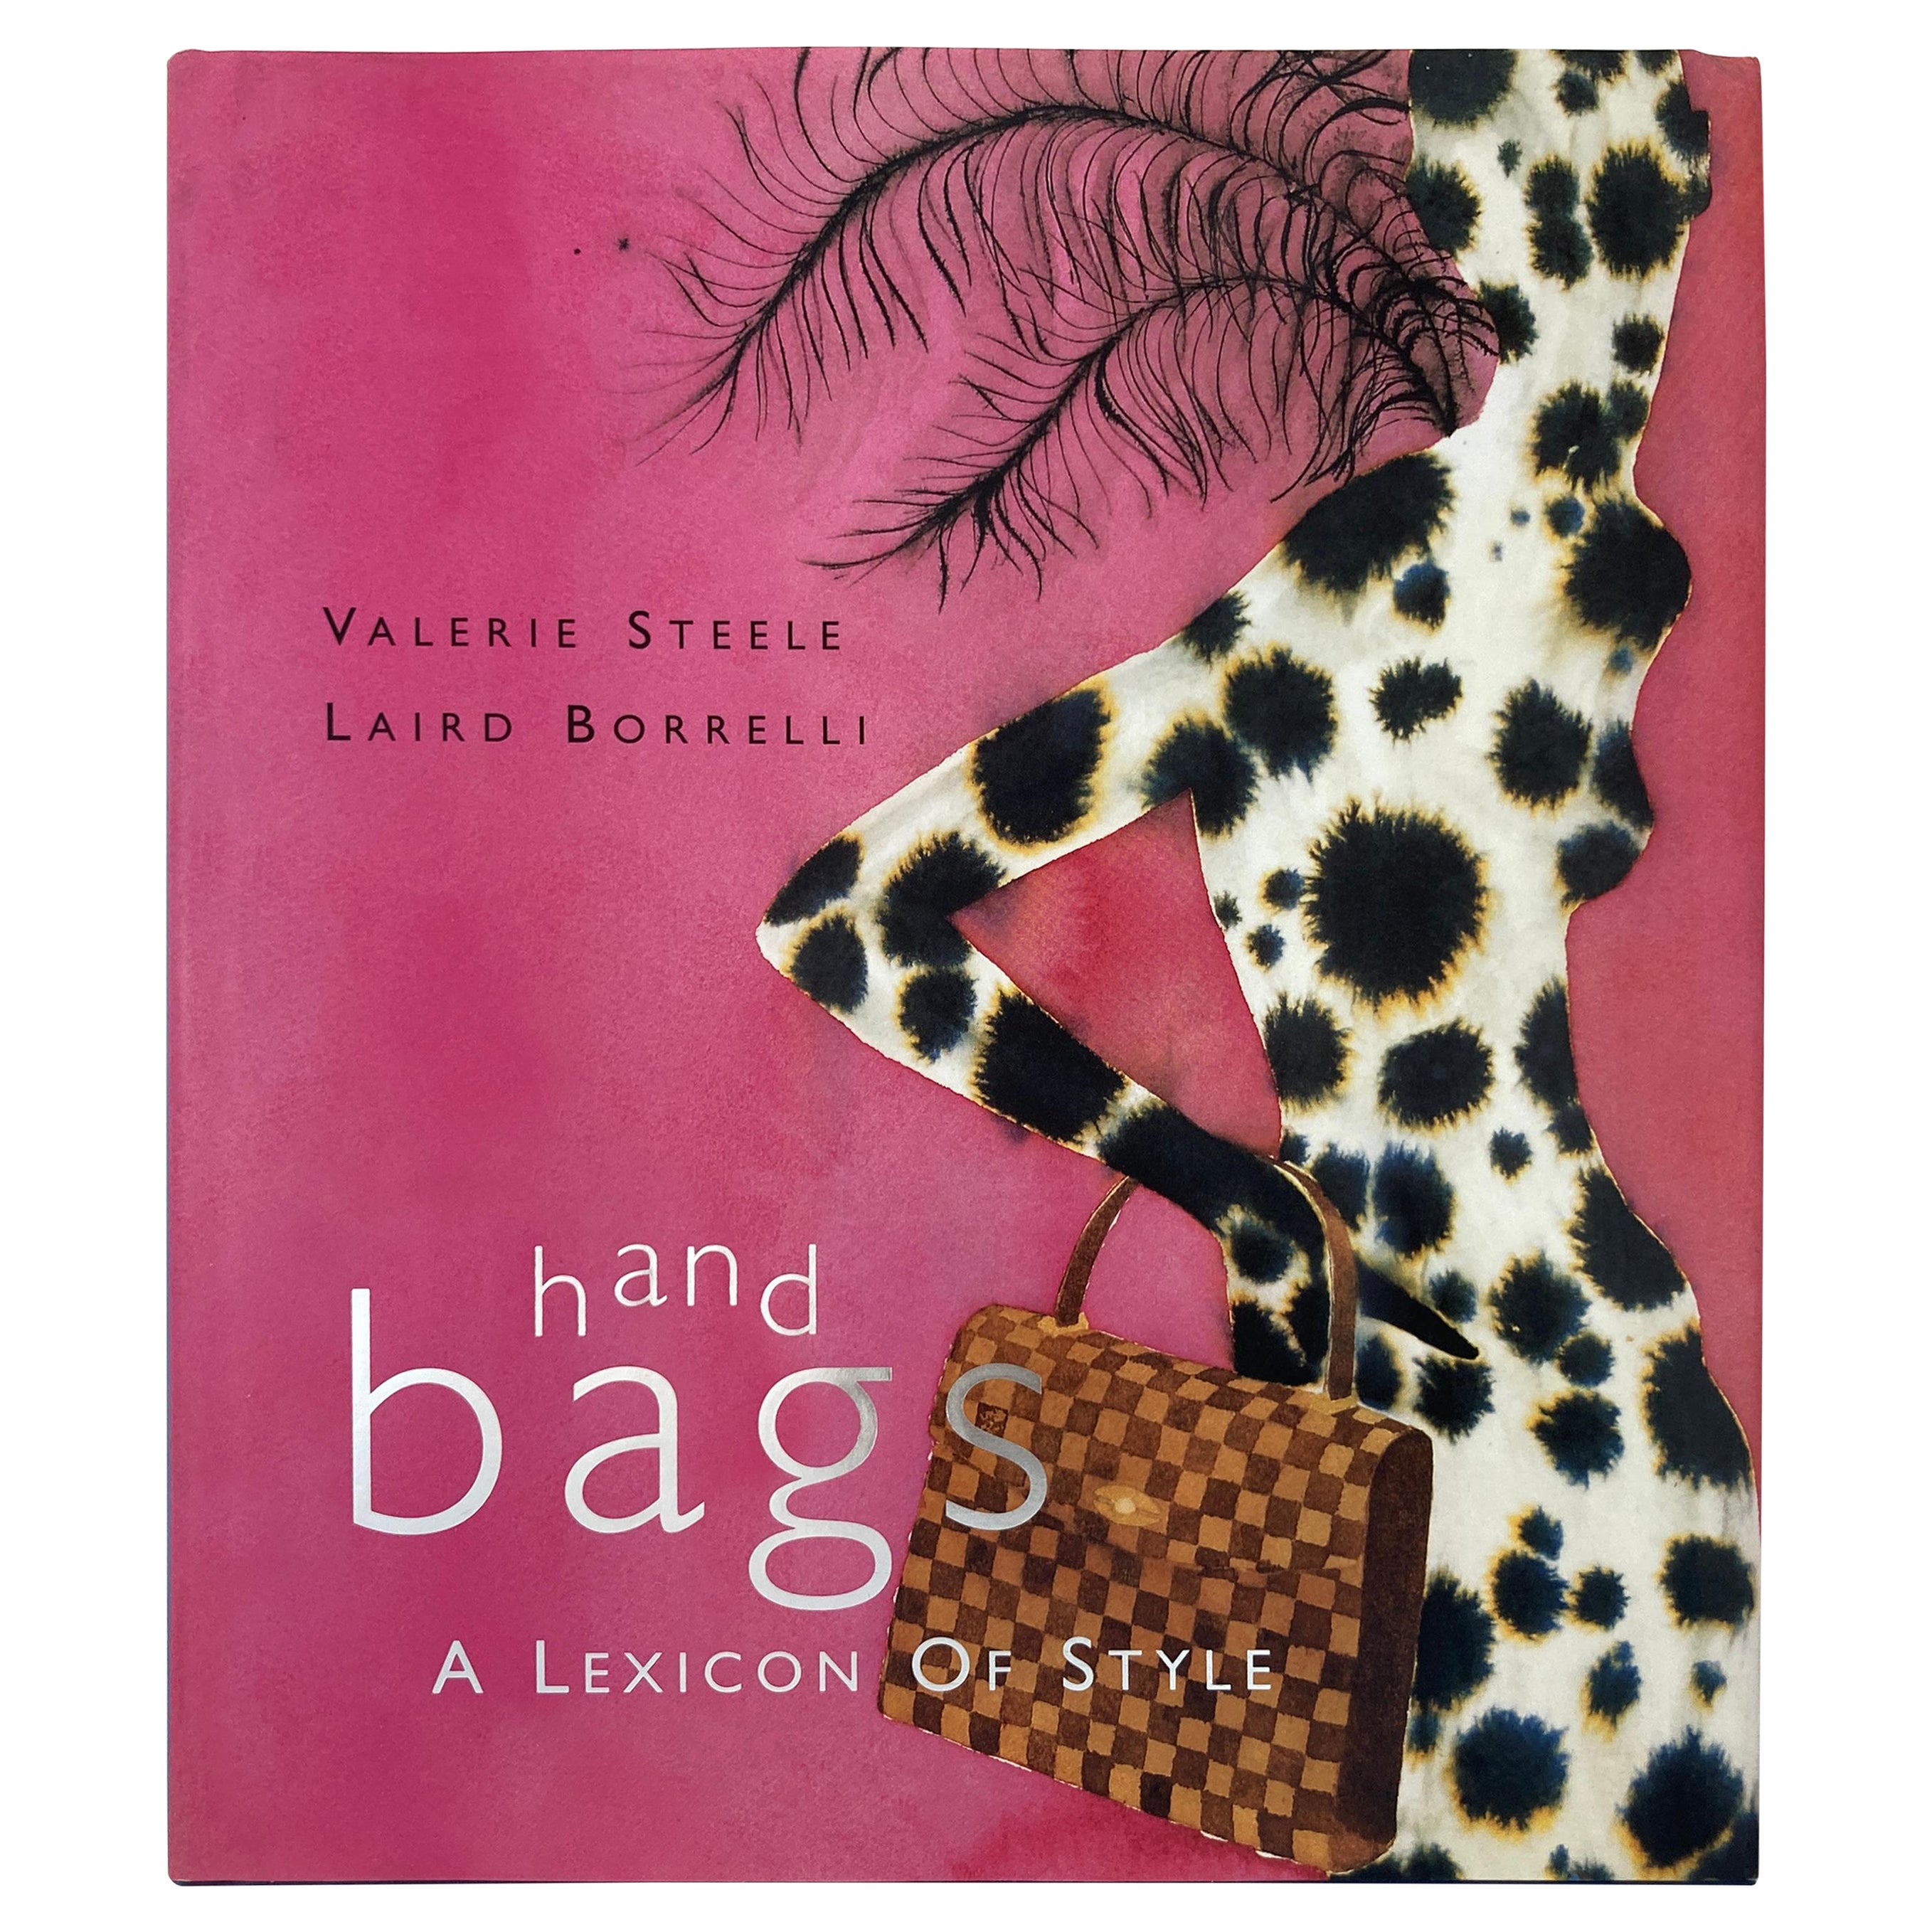 Bags : A Lexicon of Style Valerie Steele, Laird Borrelli Hardcover Book 1st Ed.